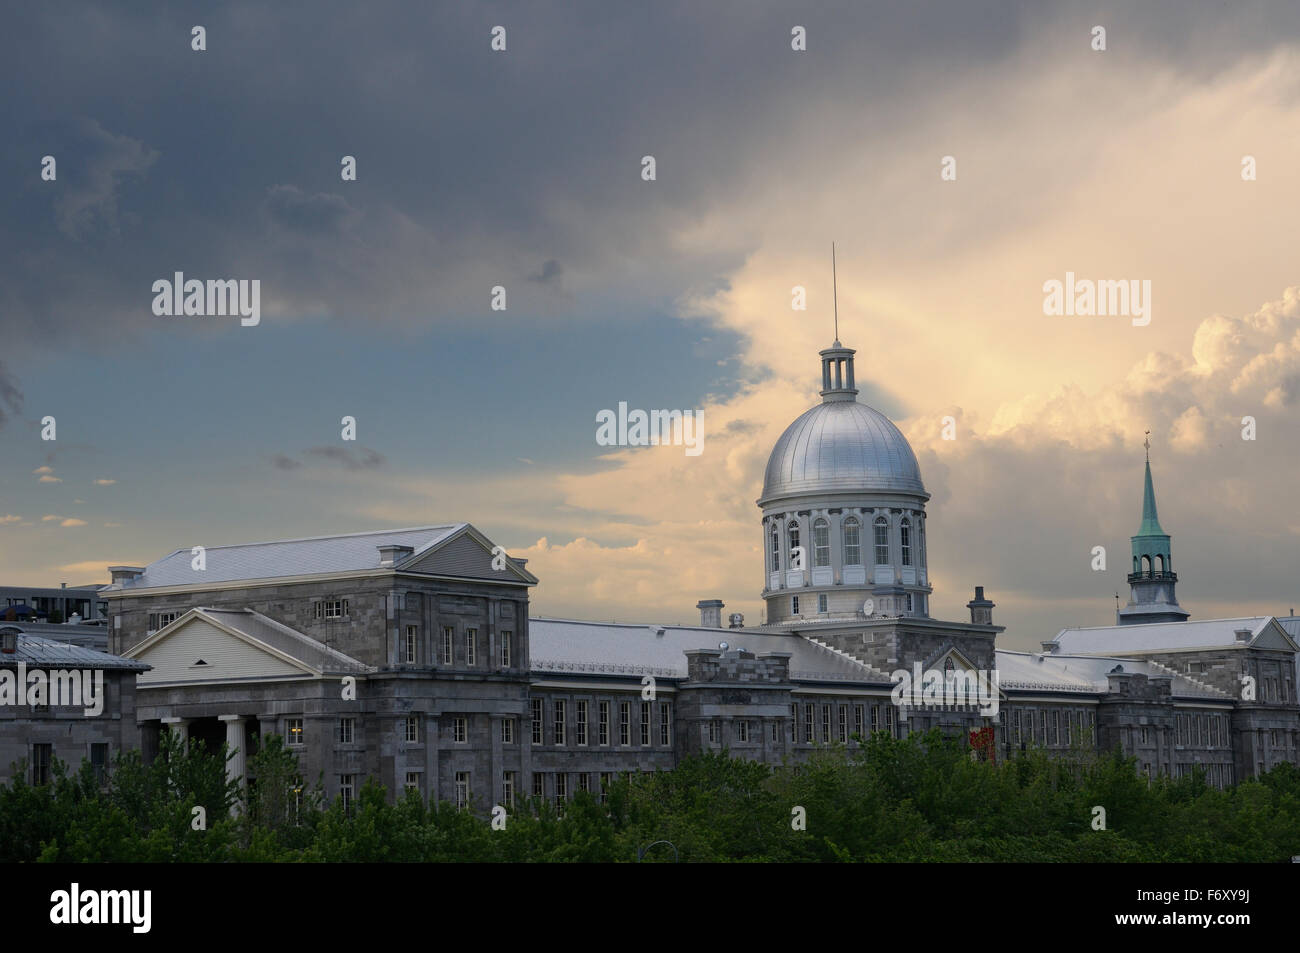 Silver Bonsecours Market in Old Montreal at sundown Stock Photo